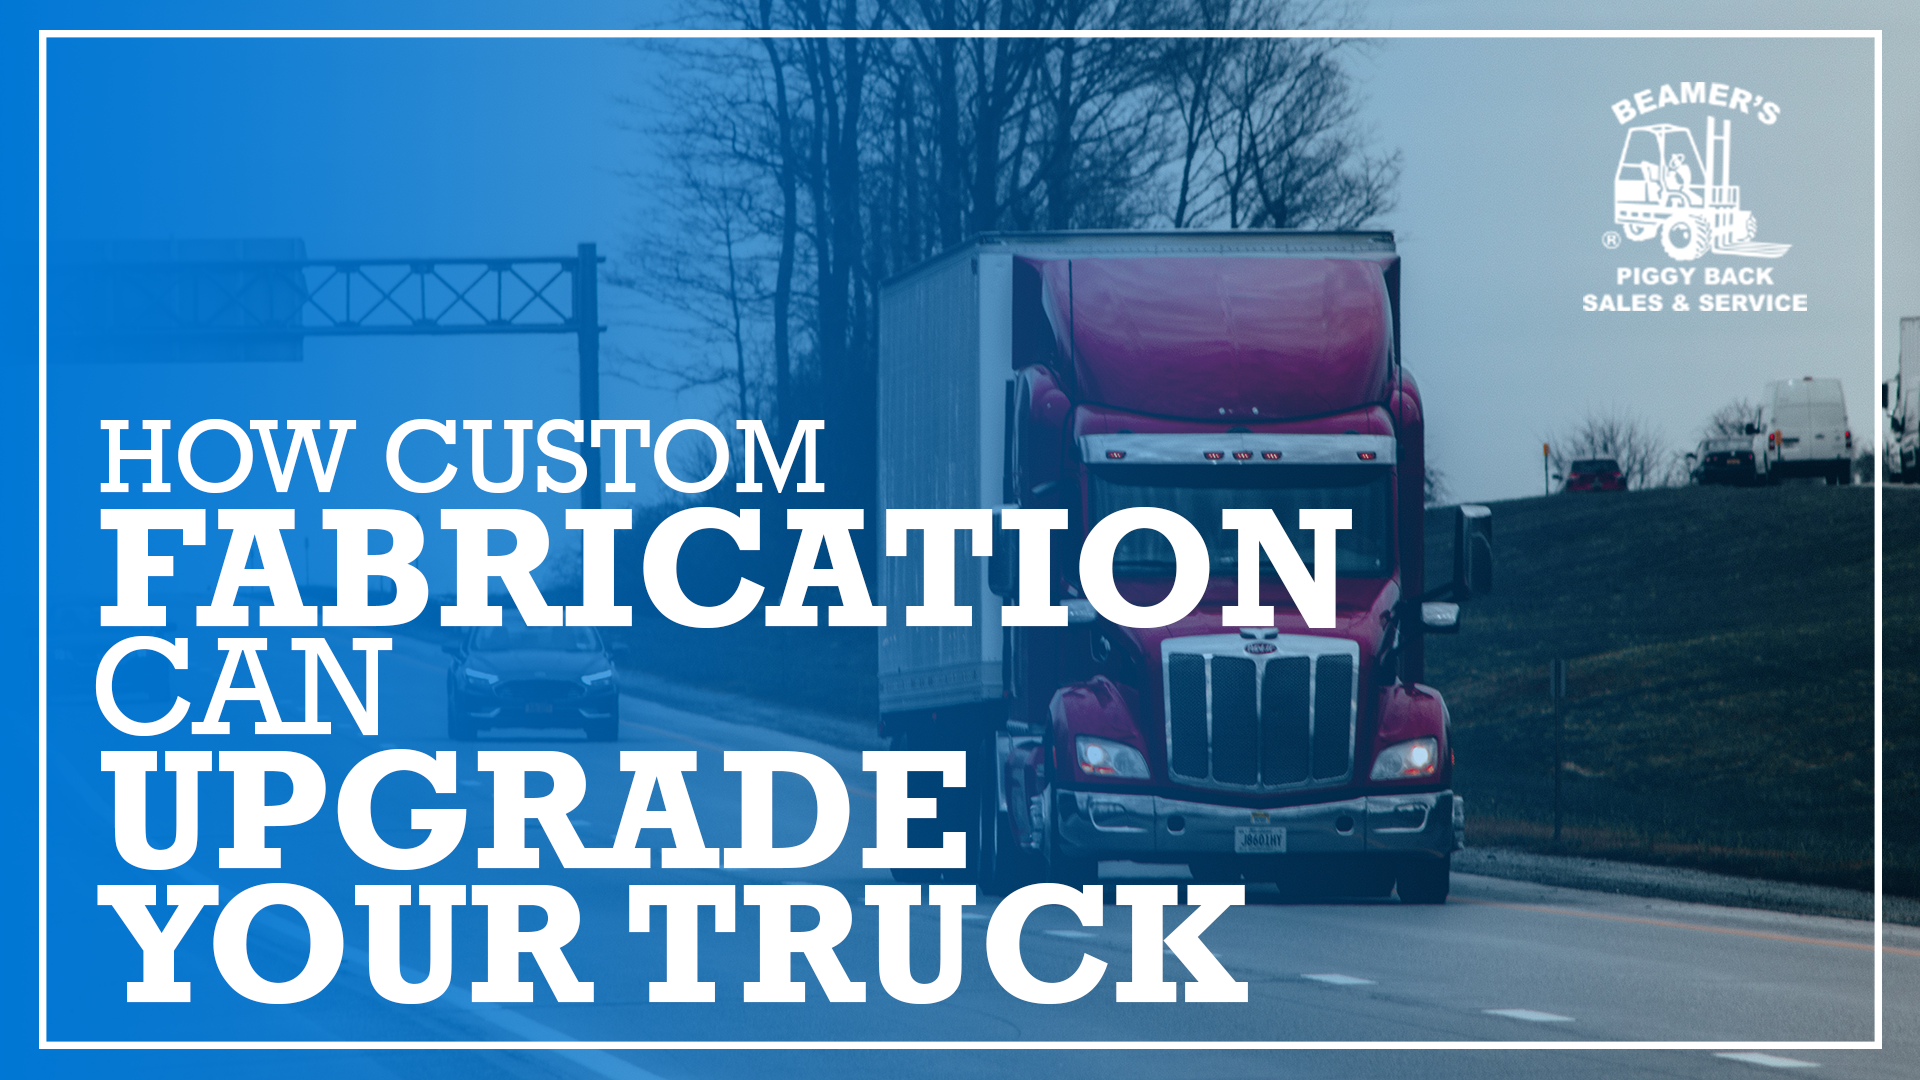 How Custom Fabrication Can Upgrade Your Truck